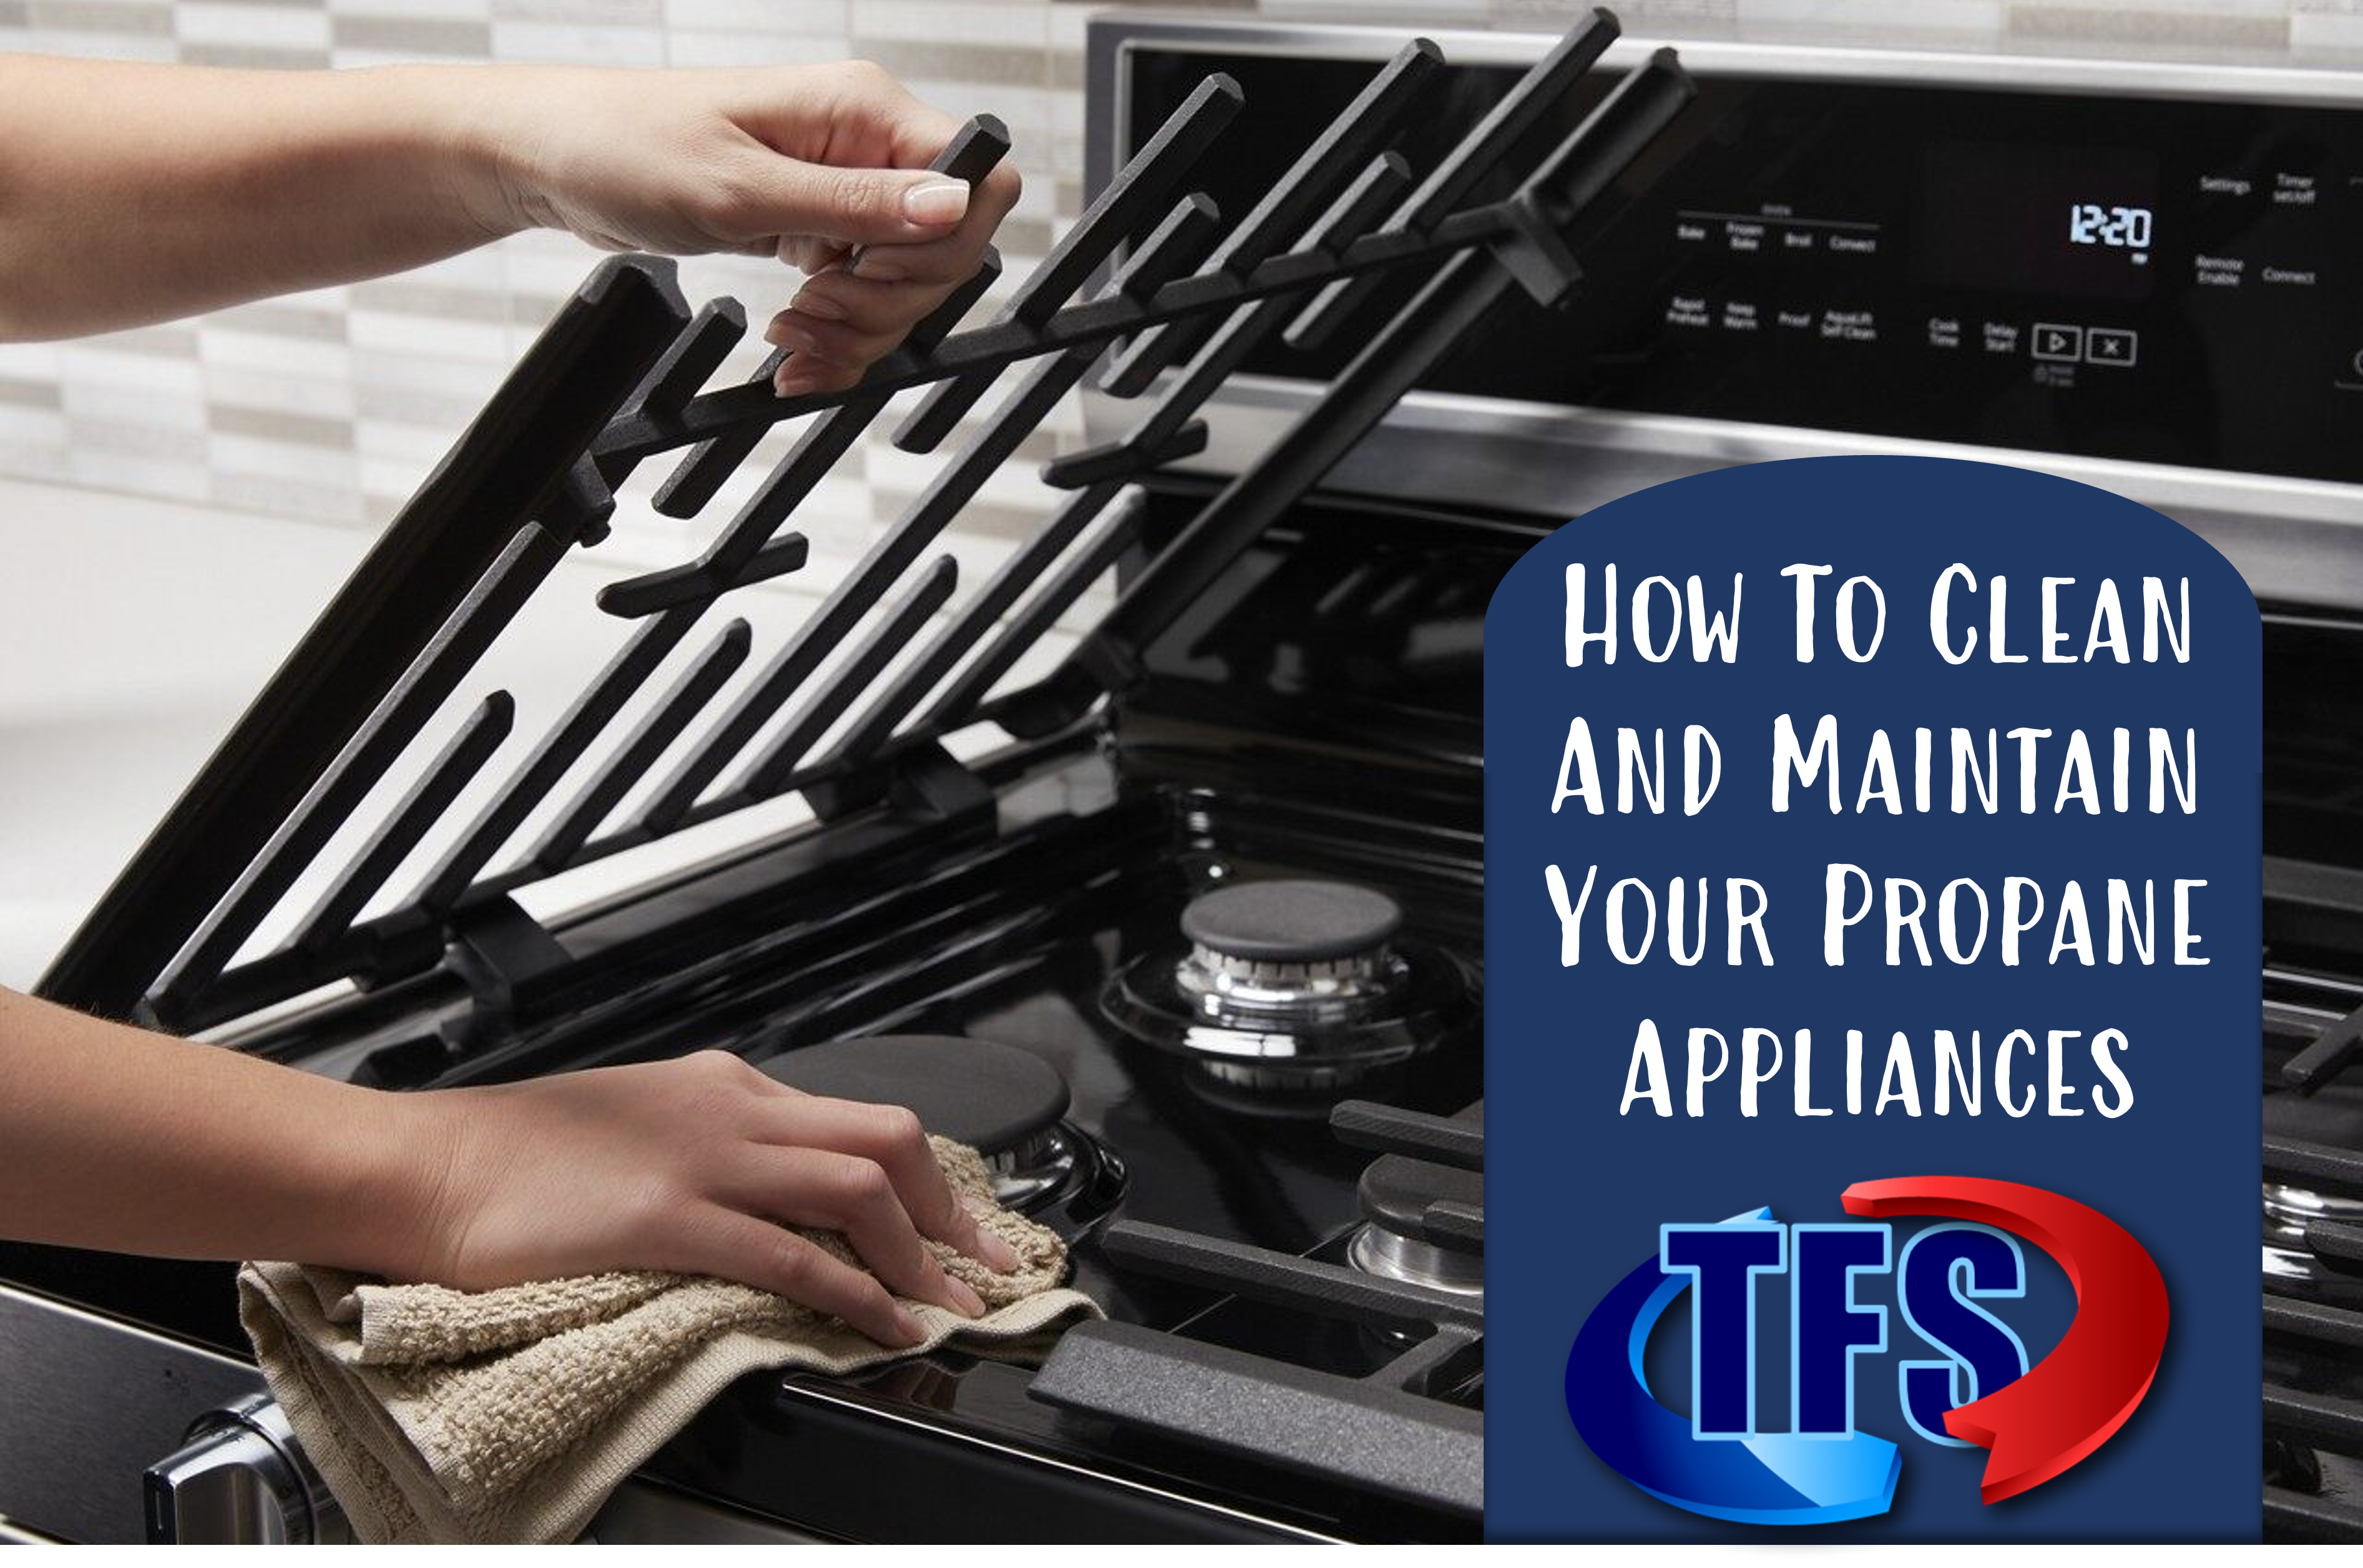 https://totalfuelservice.com/wp-content/uploads/2022/05/How-To-Clean-and-Maintain-Your-Propane-Appliances-1.png